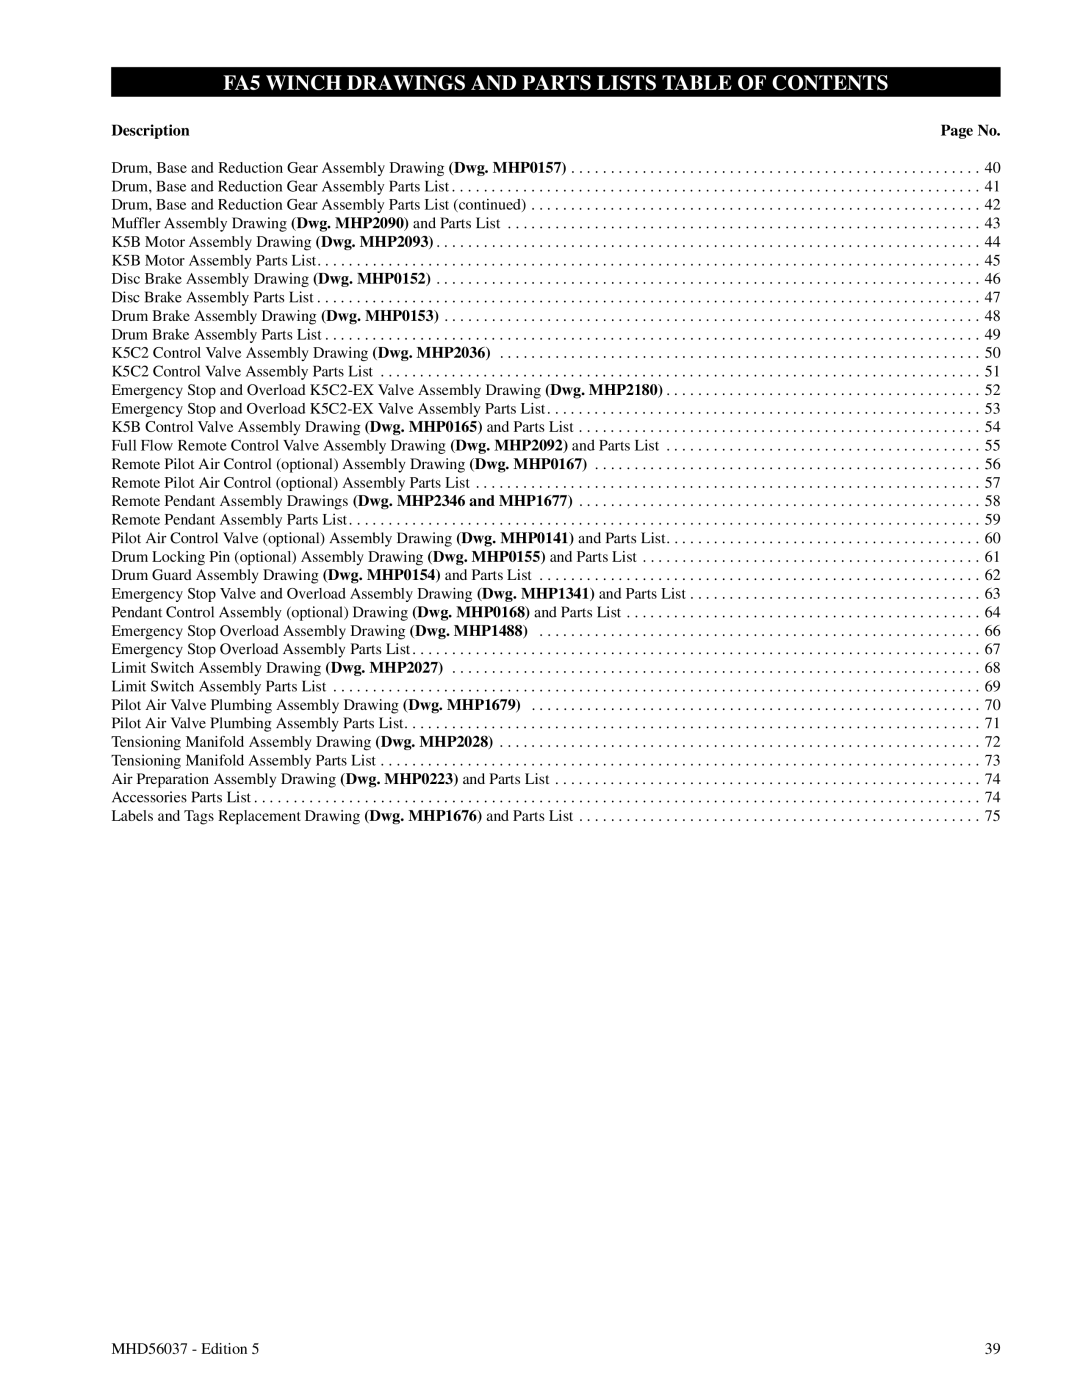 Ingersoll-Rand FA5T manual FA5 WINCH DRAWINGS AND PARTS LISTS TABLE OF CONTENTS, Description 